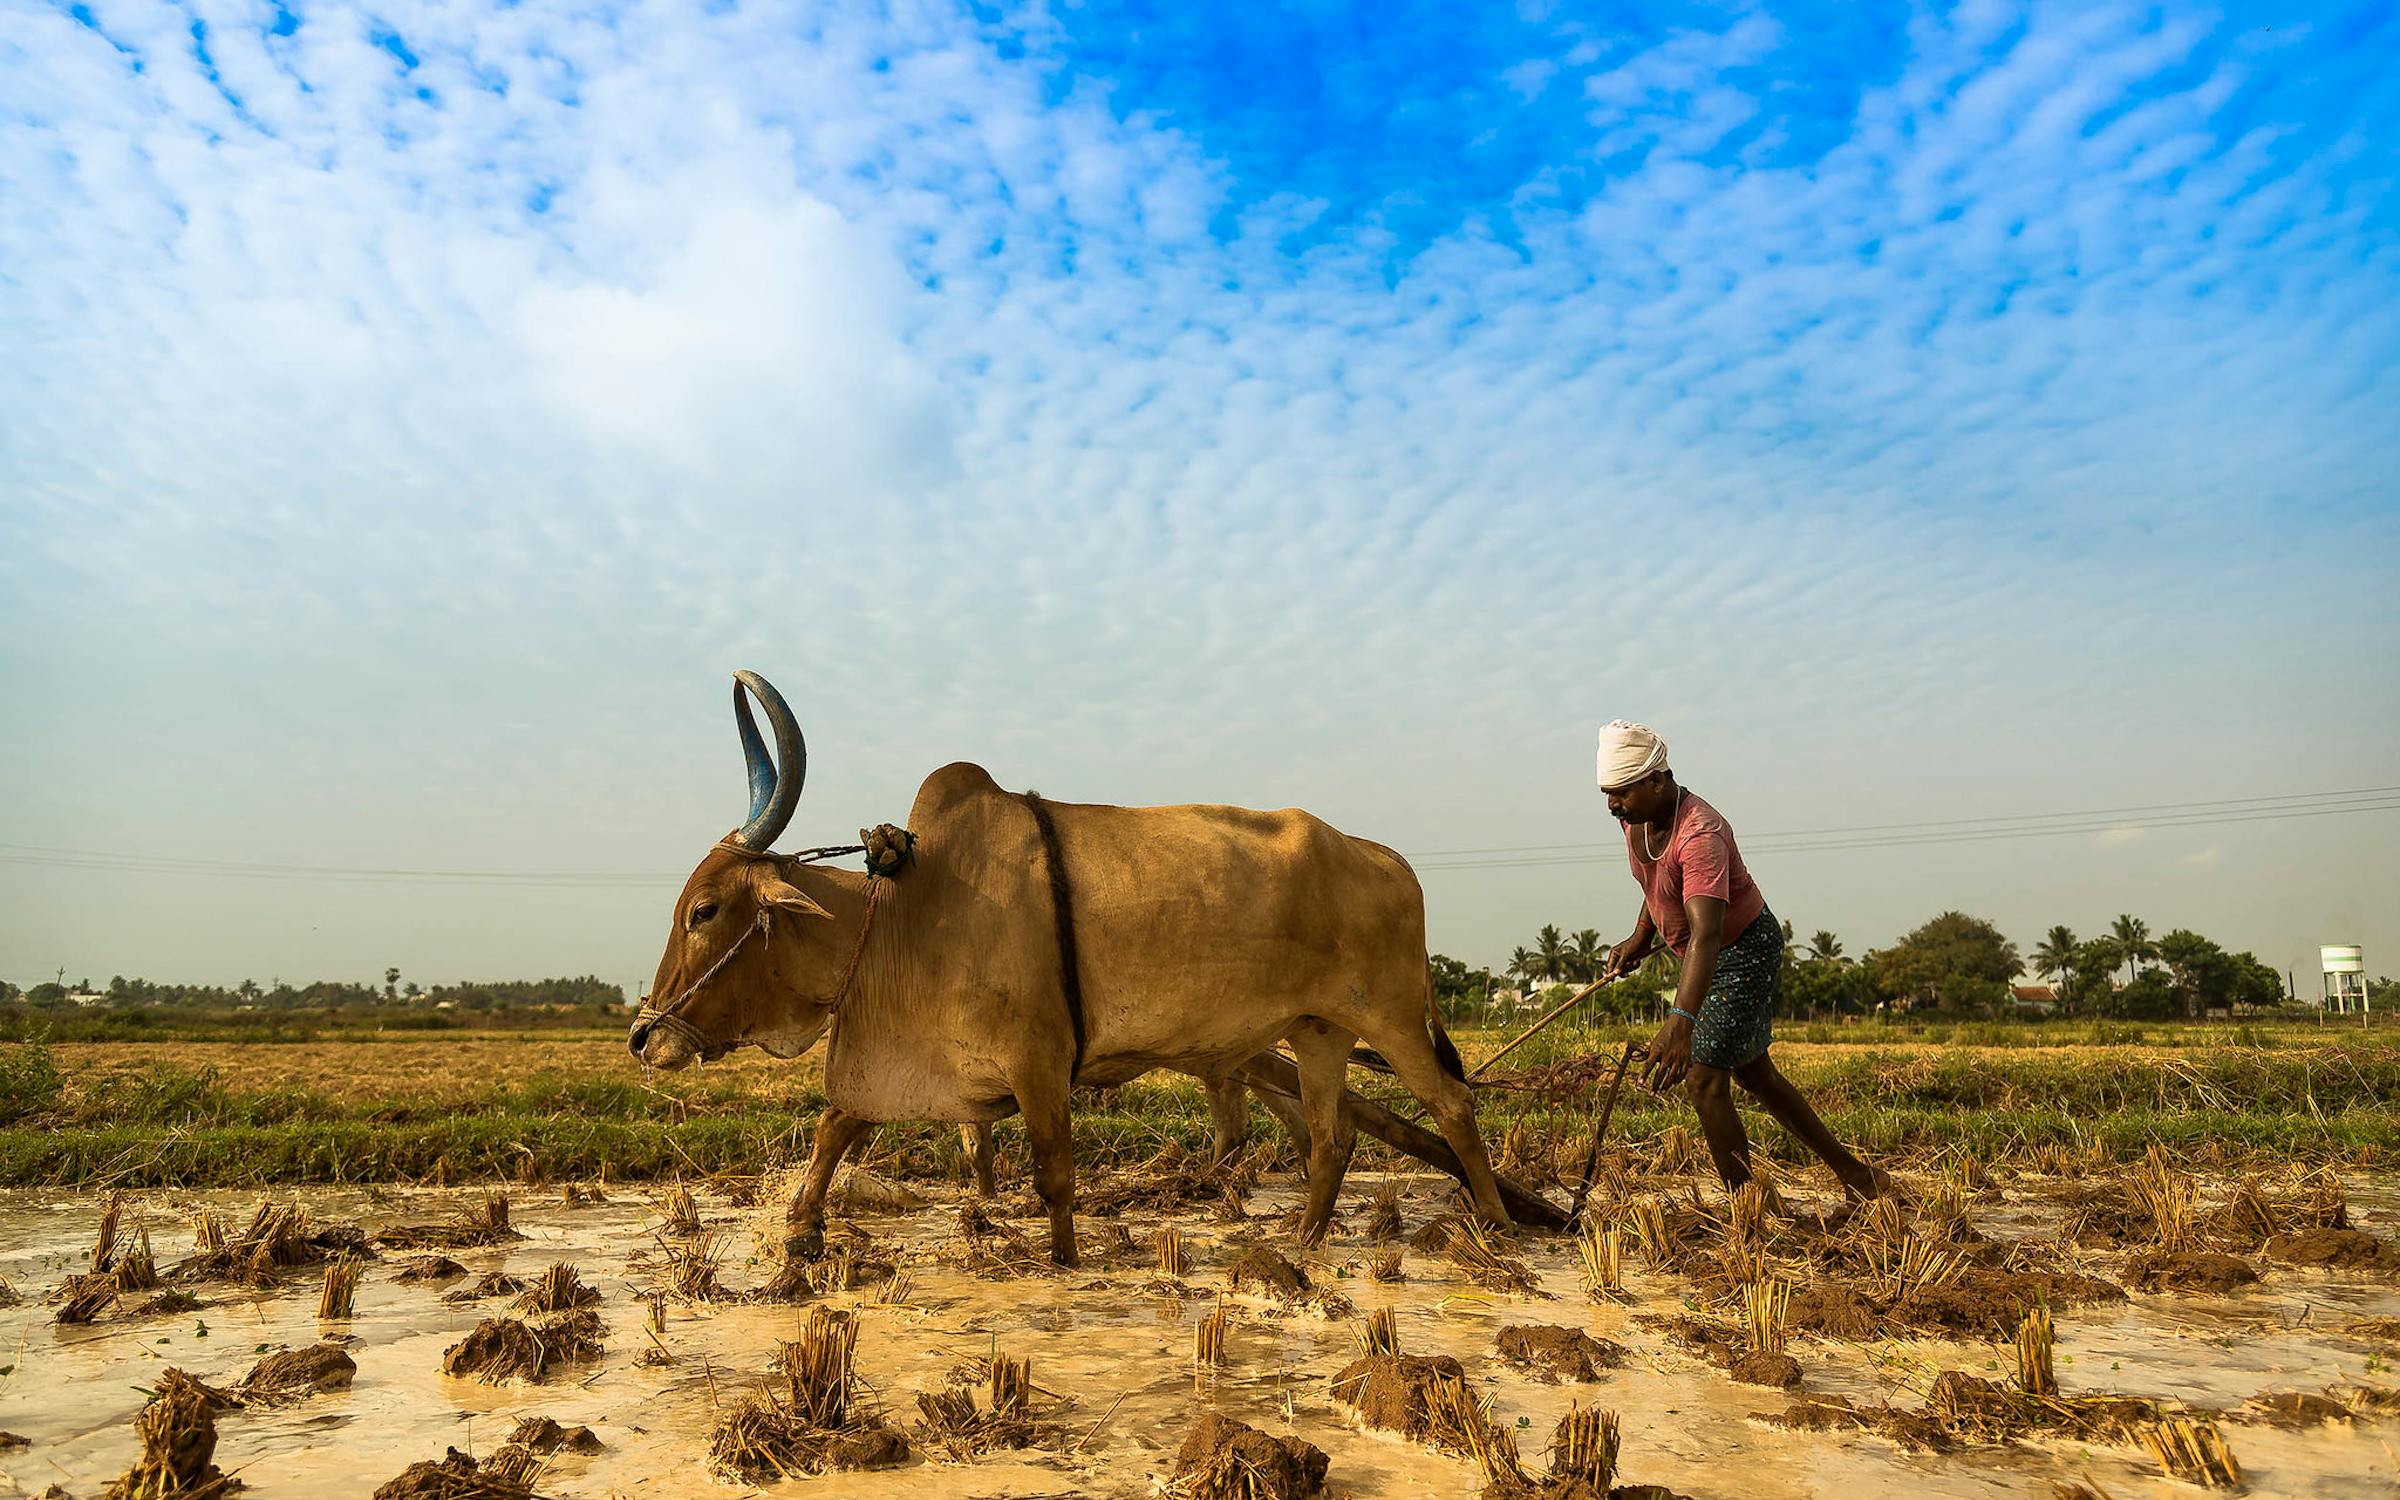 Climate change drives down yields and nutrition of Indian crops